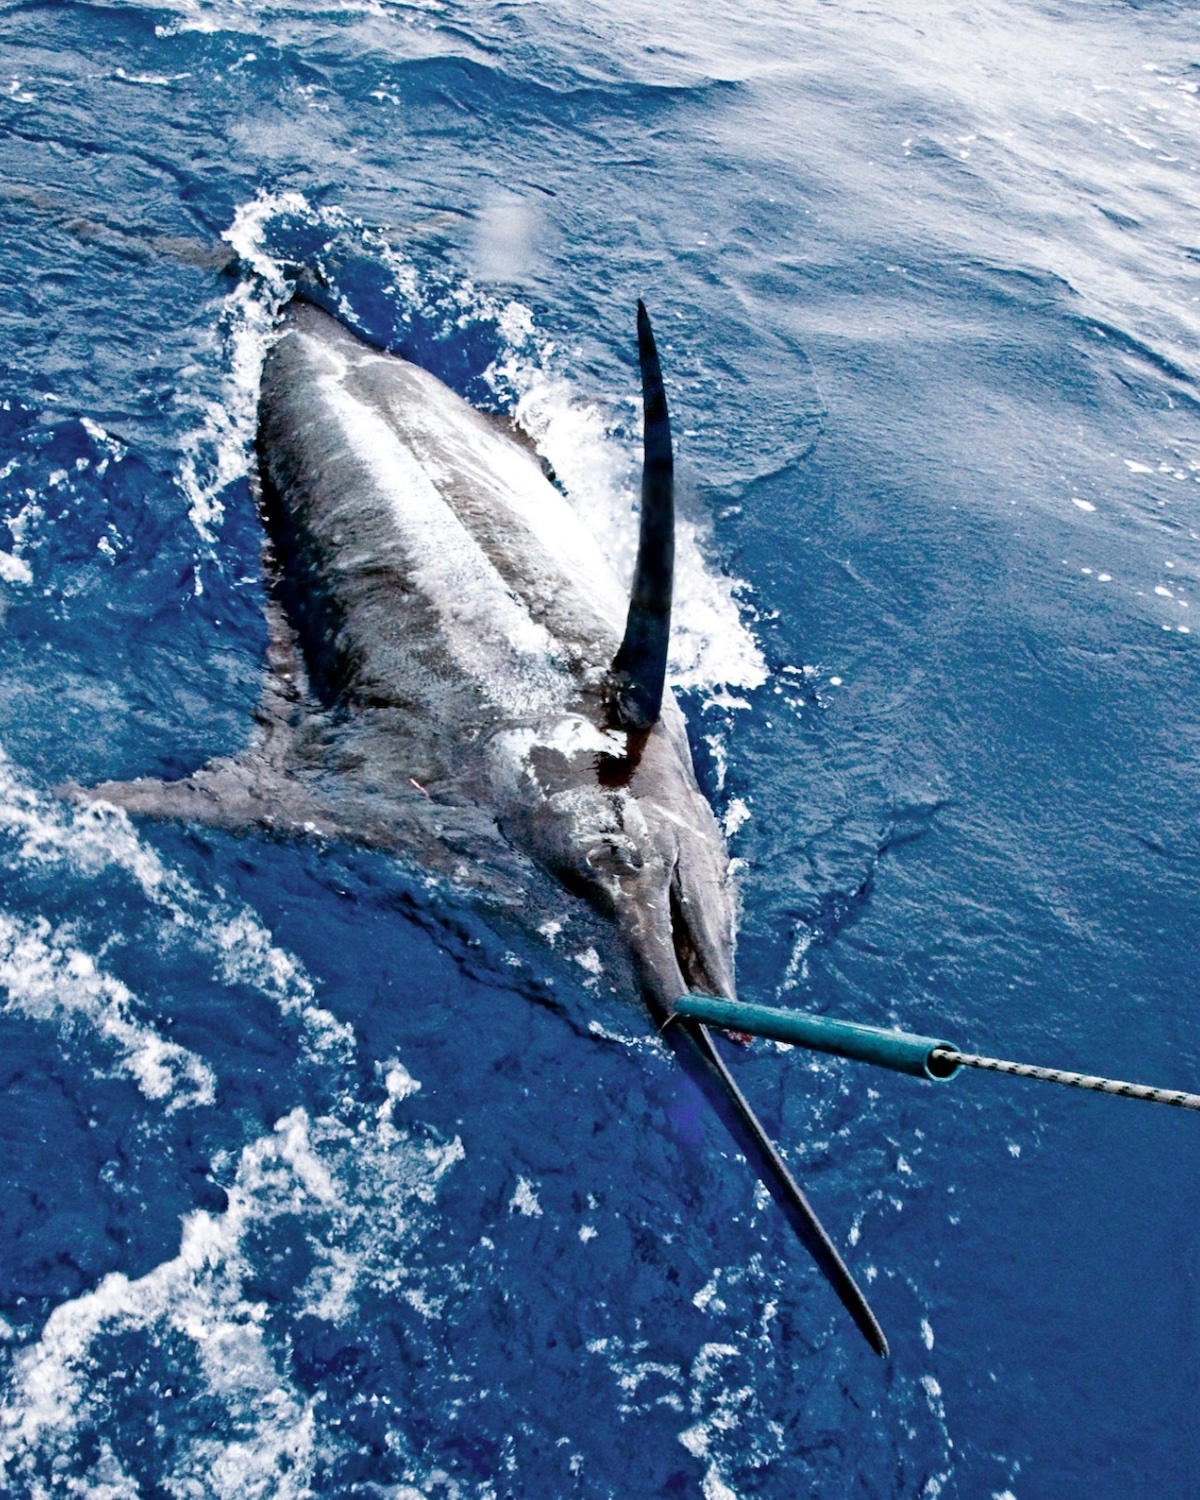 Marlin ©Phil Licence CC BY-ND 2.0